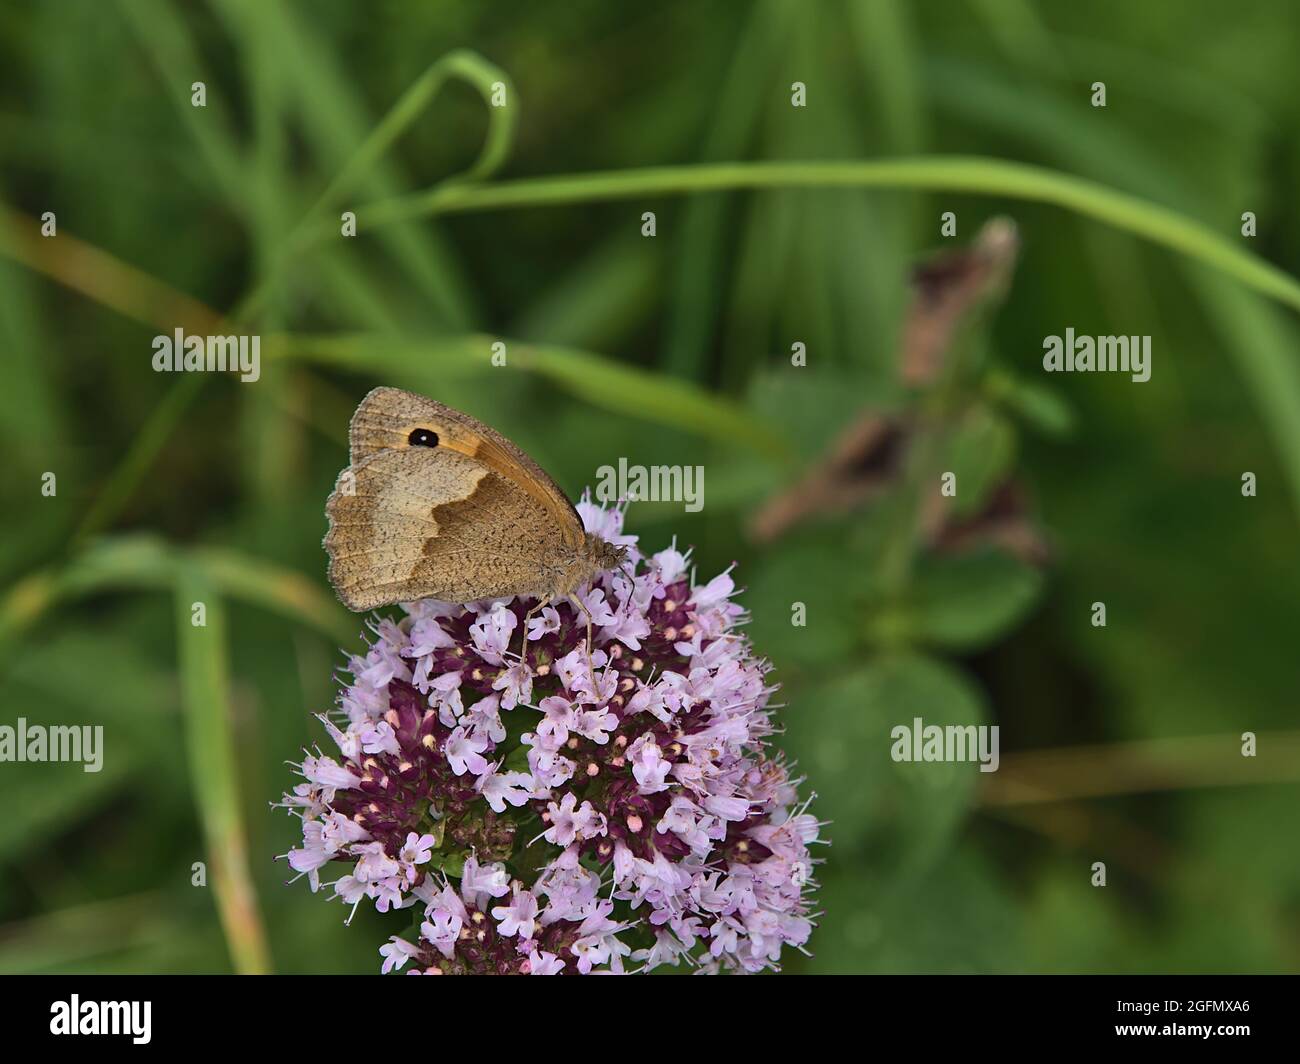 Closeup view of a meadow brown butterfly (maniola jurtina) with black dot collecting nectar from an oregano flower (origanum vulgare) with pink bloom. Stock Photo